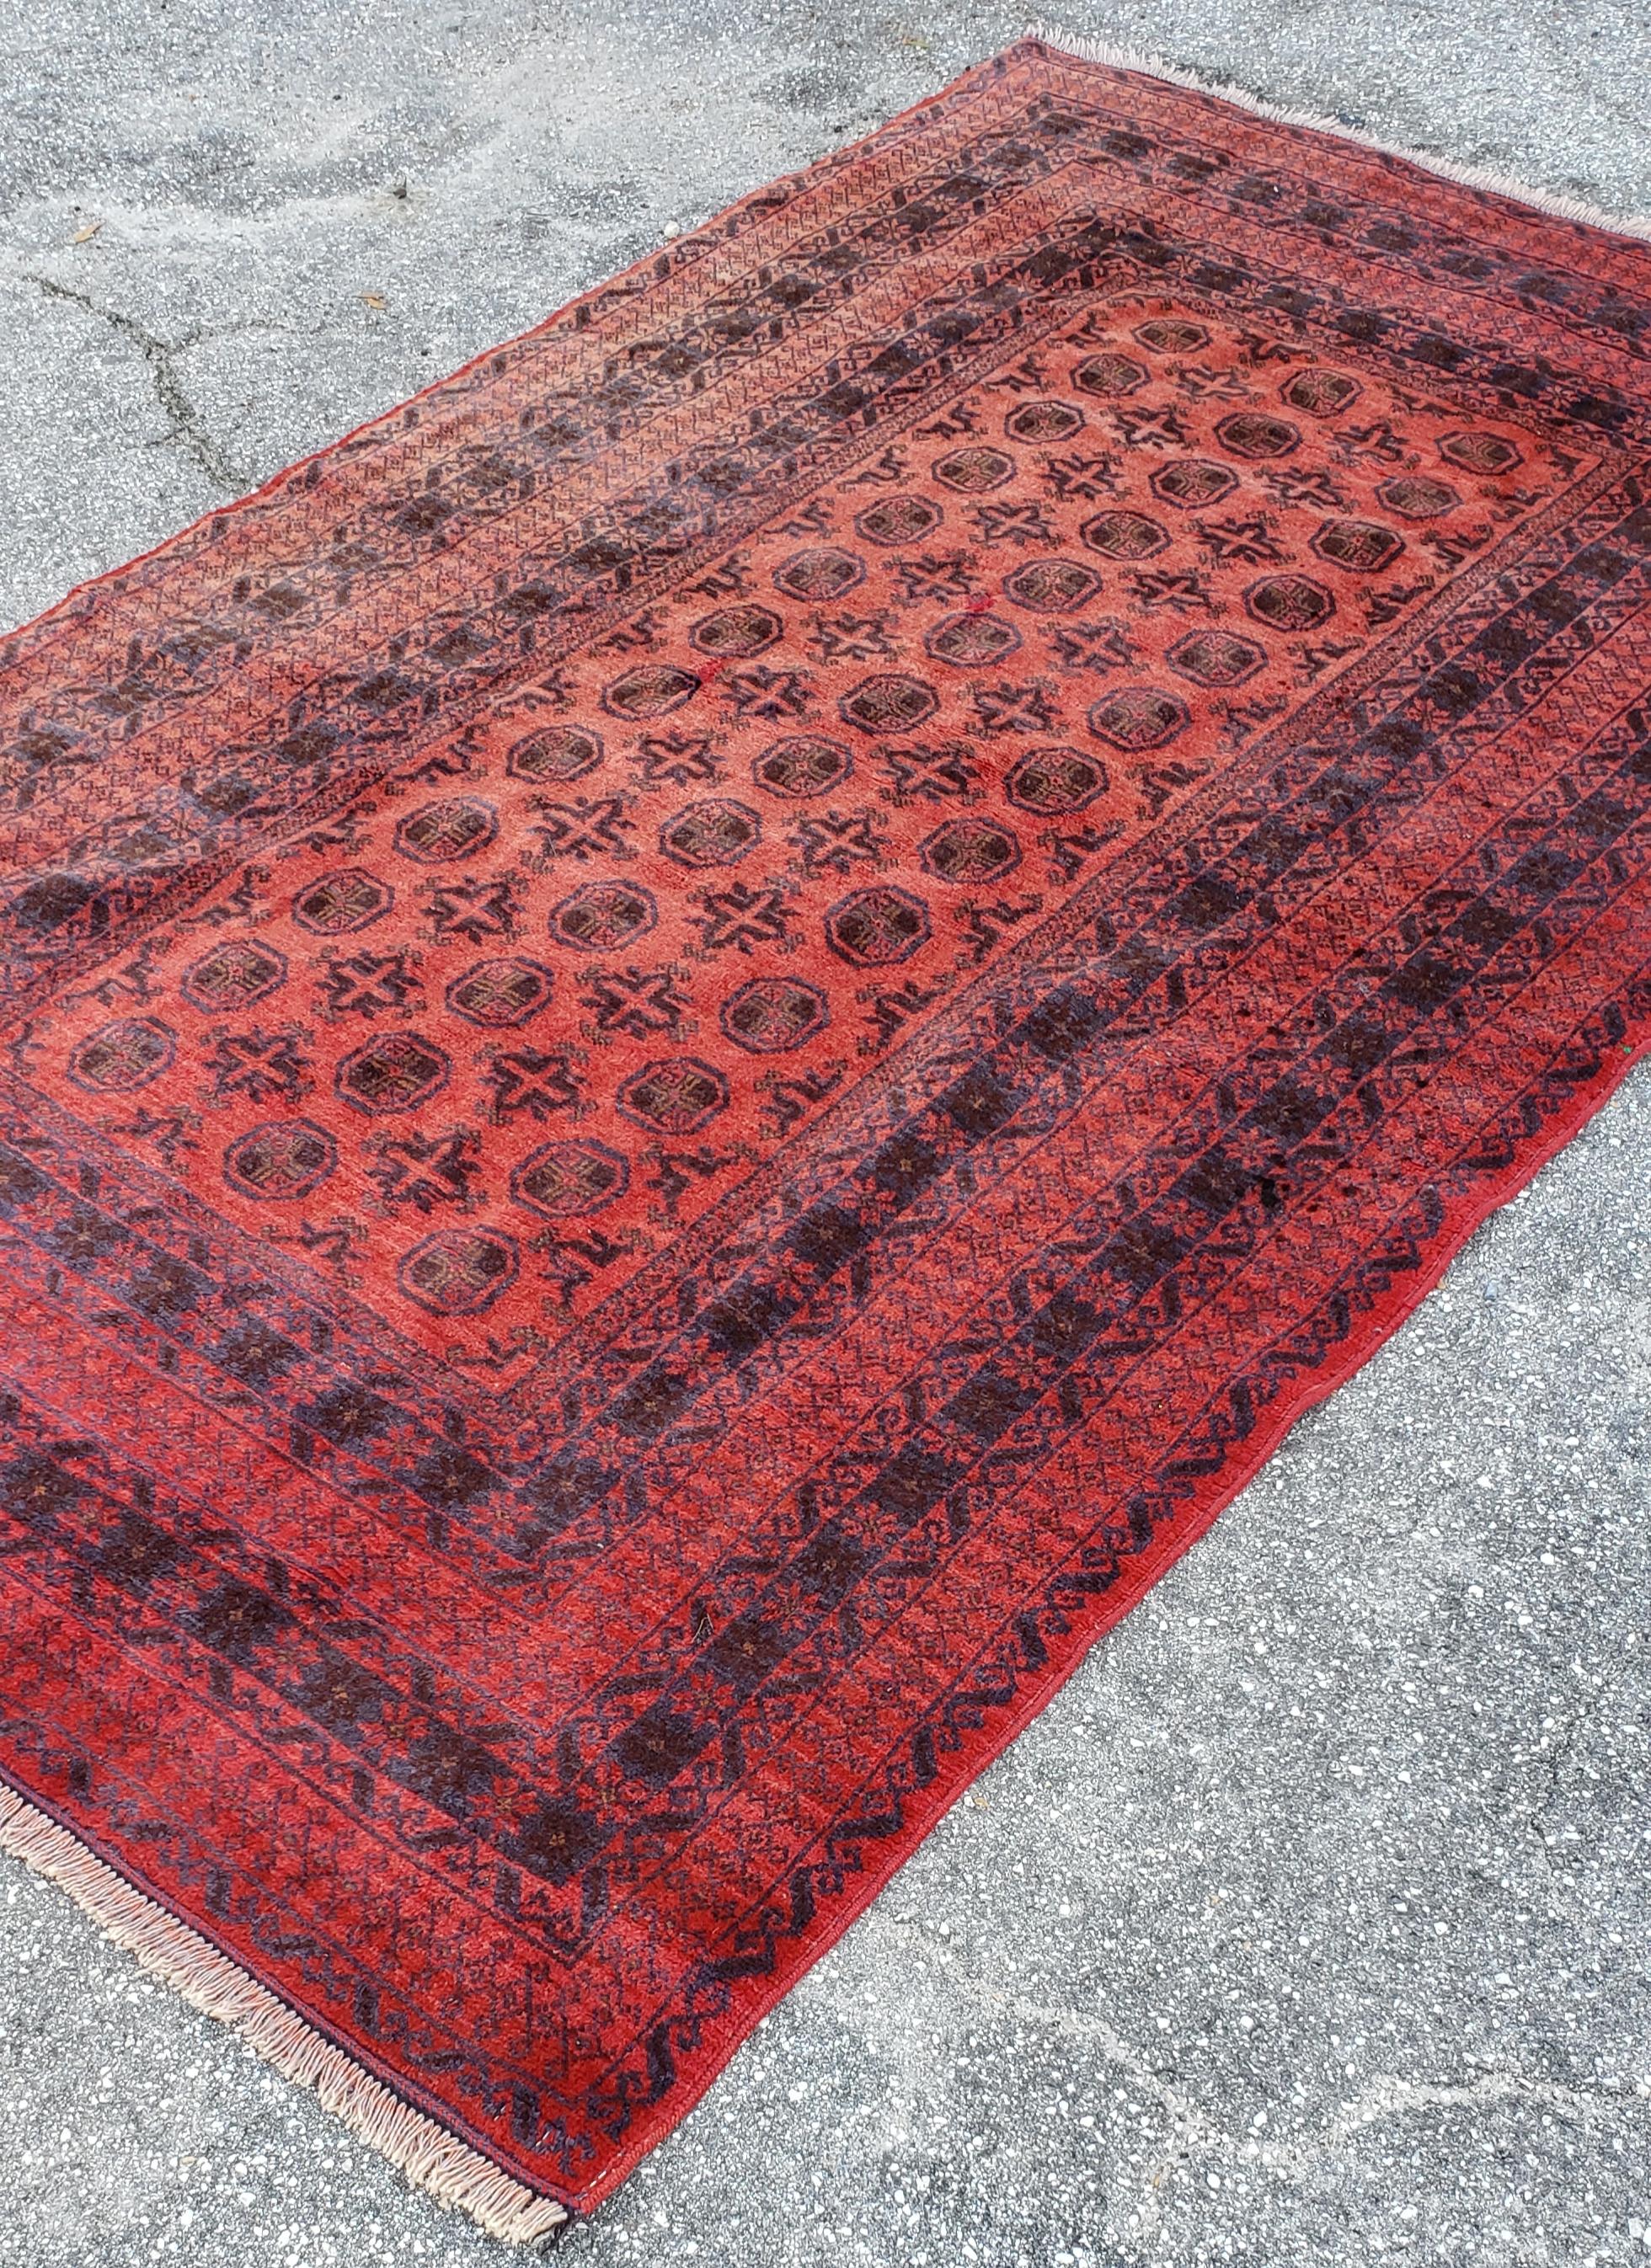 We carry some of the best Afghan rugs around, and if you like to give your room a colorful new look with one of our stunning carpets, we are here to help. This one measures approximately 80